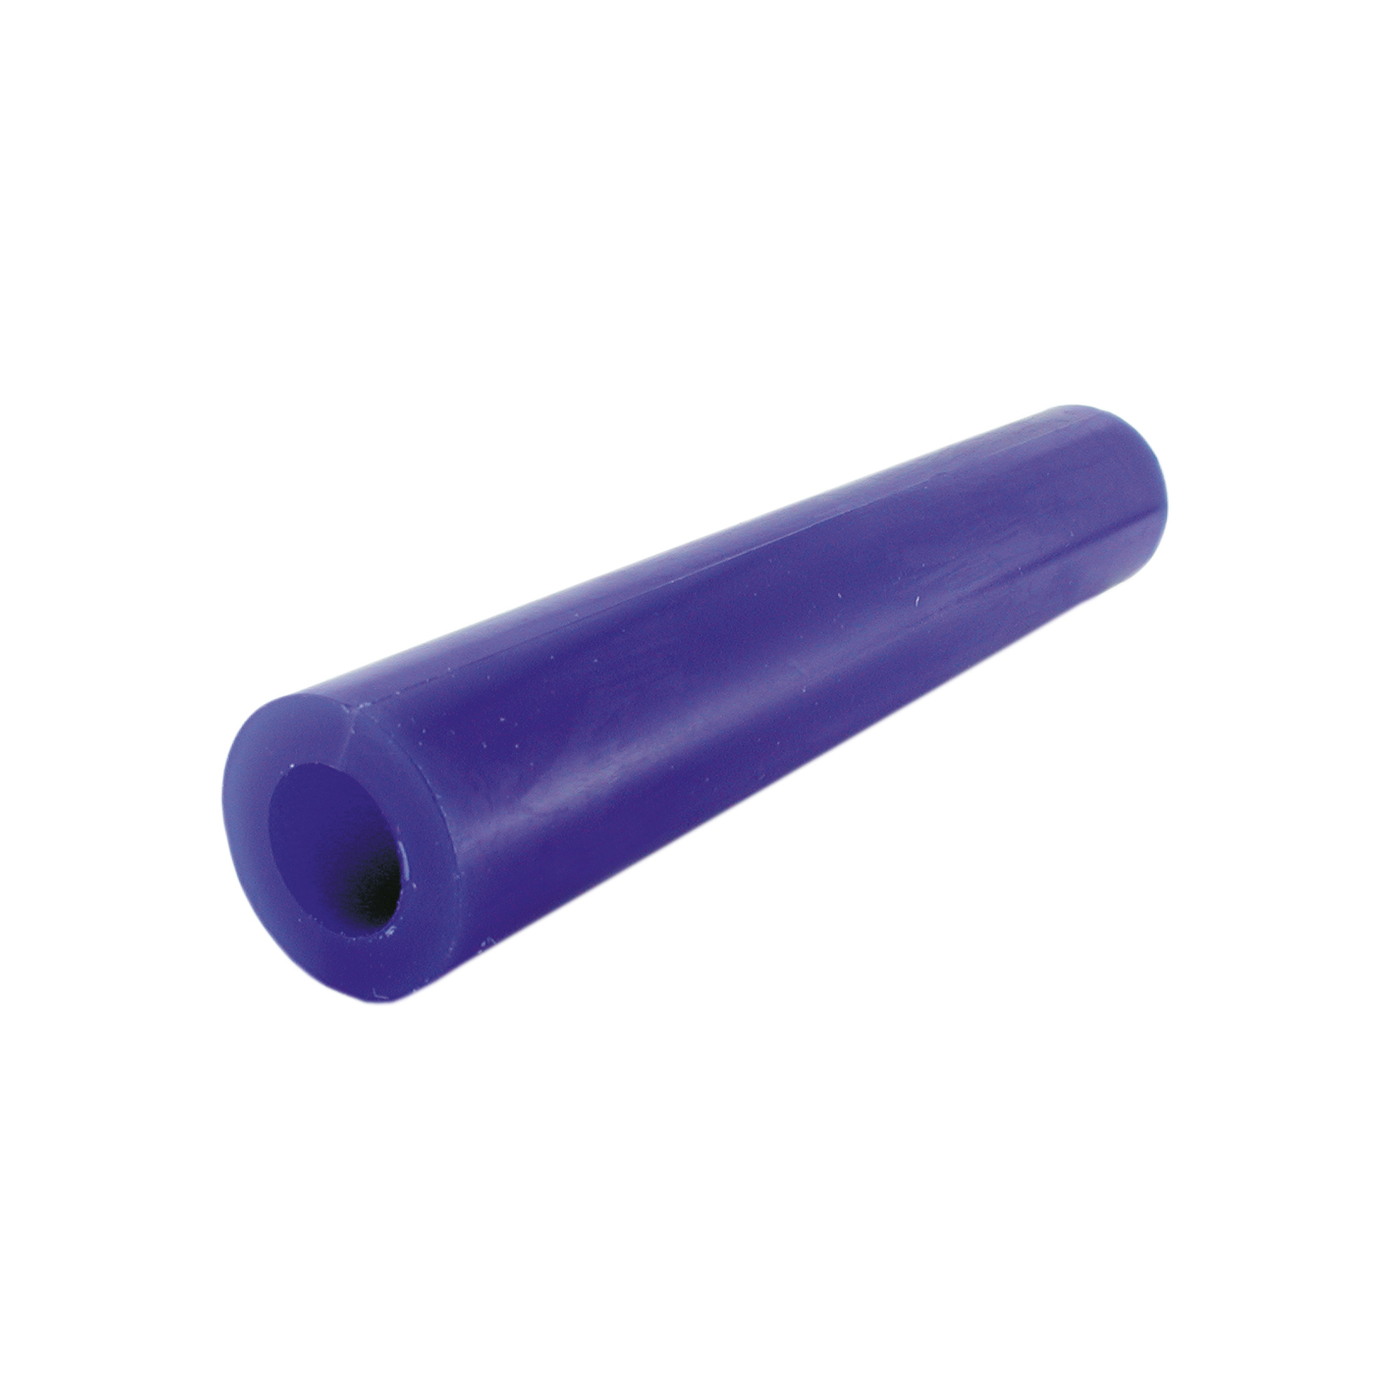 Filing/Milling Wax Round Profile, Hard, Blue, Centr. Hole - 1 piece